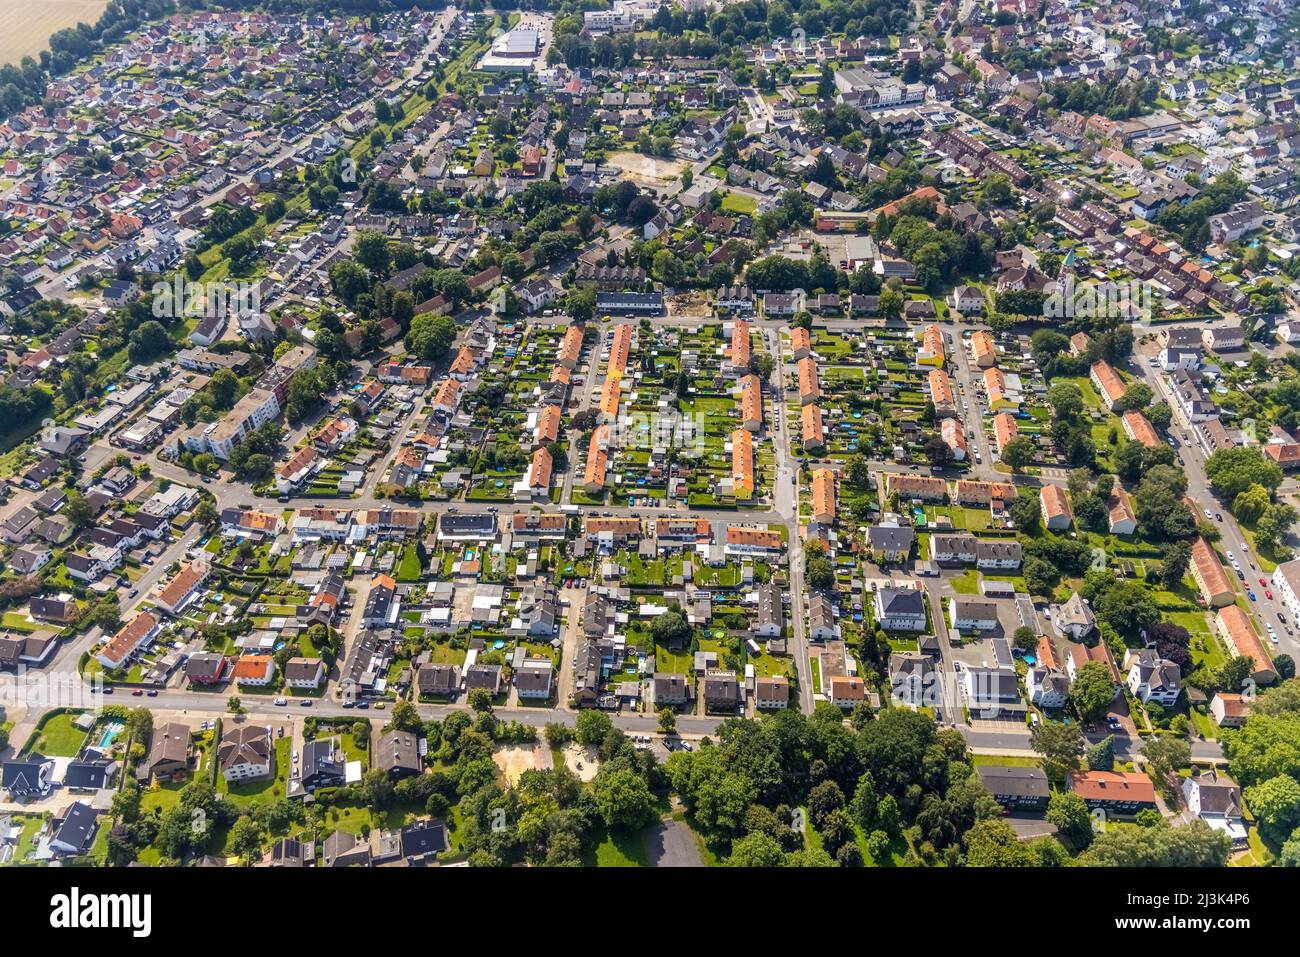 Aerial view, miners' housing estate between Pröbstingstraße and Bergstraße with red roofs in the district of Heeren-Werve, Kamen, Ruhr area, North Rhi Stock Photo